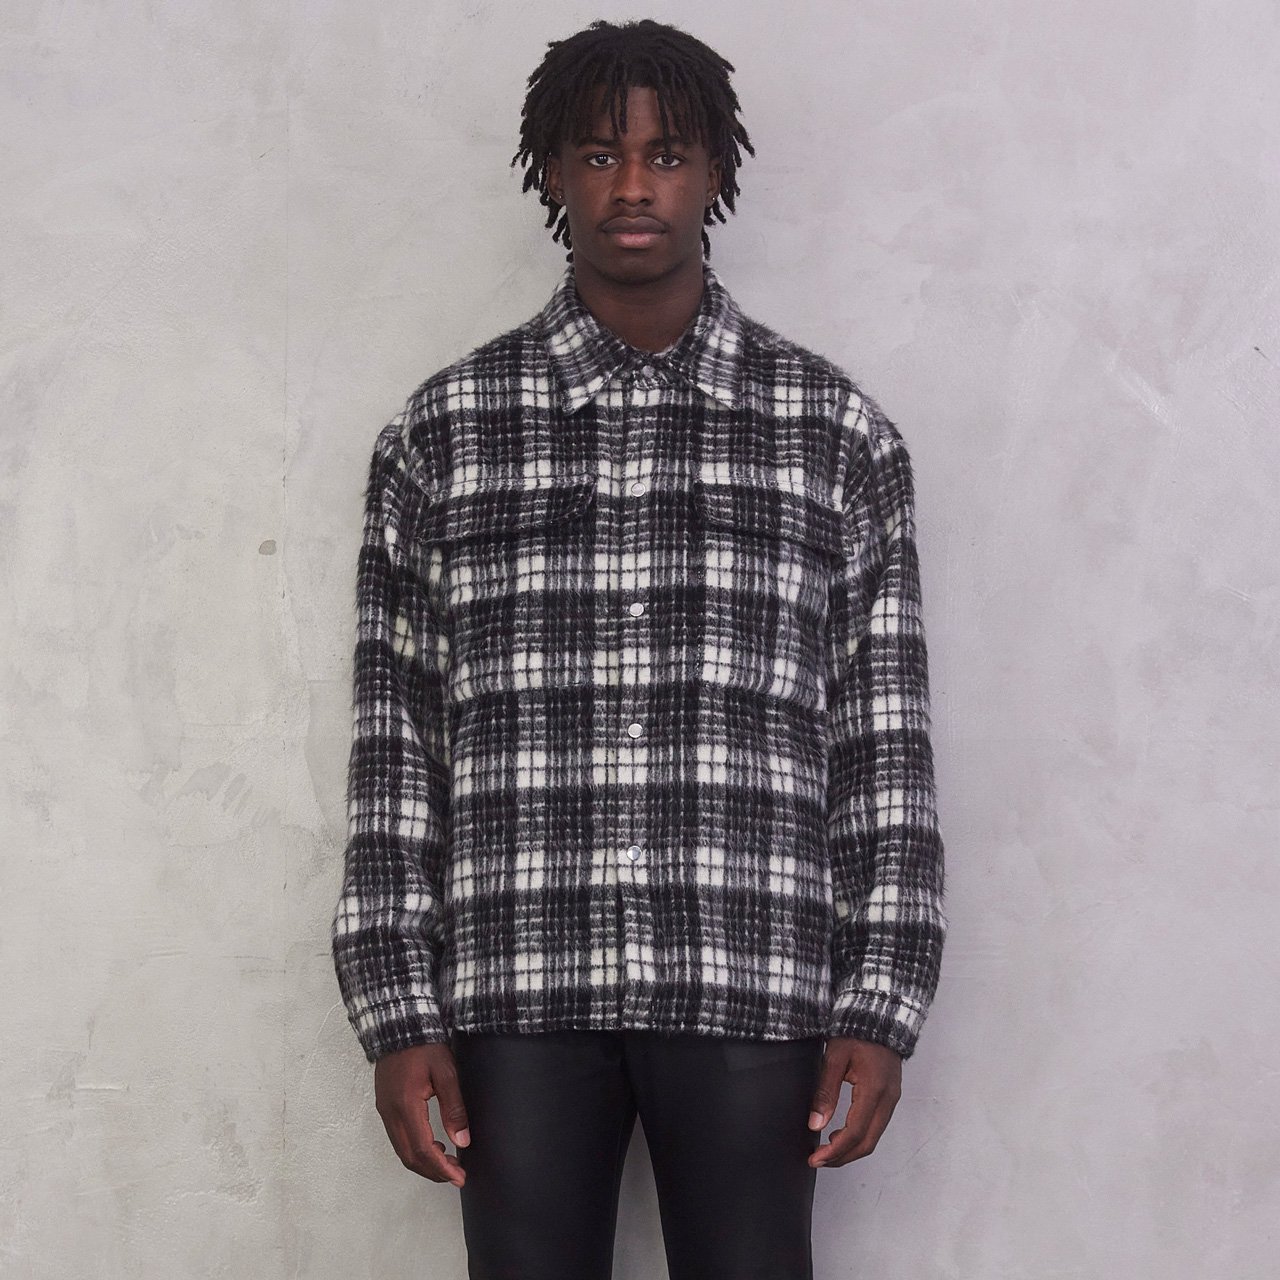 MLVINCE(メルヴィンス)｜OVERSIZED CHECK JACKET BLACK 正規取扱店 